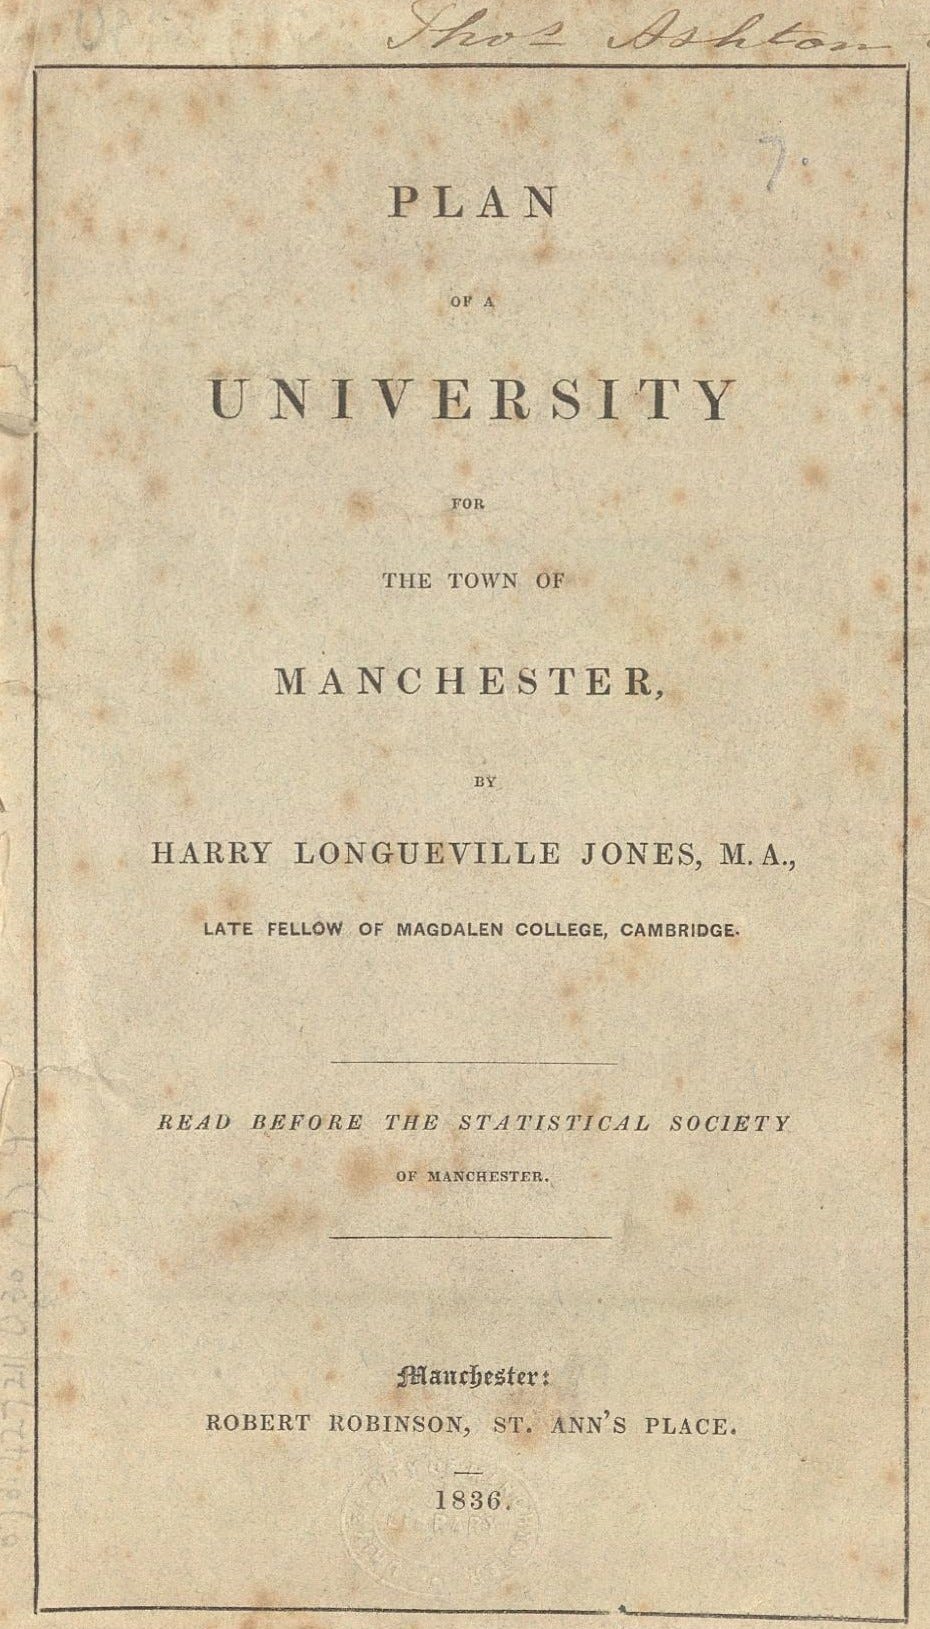 Printed front page of the ‘Plan of a university for the town of Manchester’ by Harry Longueville Jones.